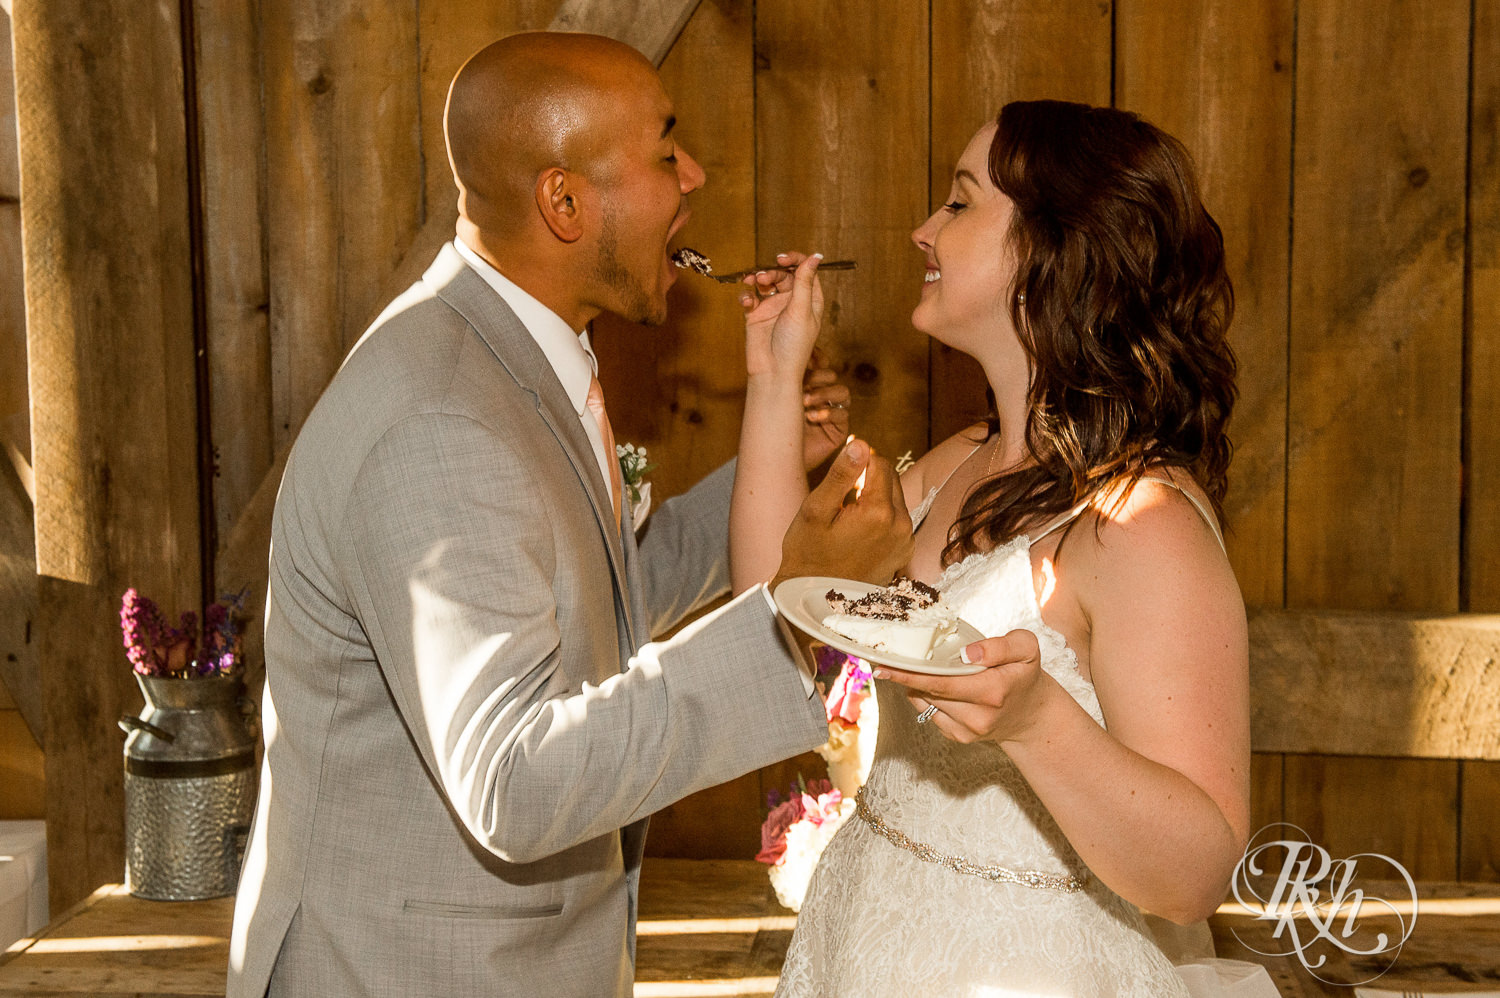 Bride and Asian groom eat cake during wedding reception at Birch Hill Barn in Glenwood City, Wisconsin.